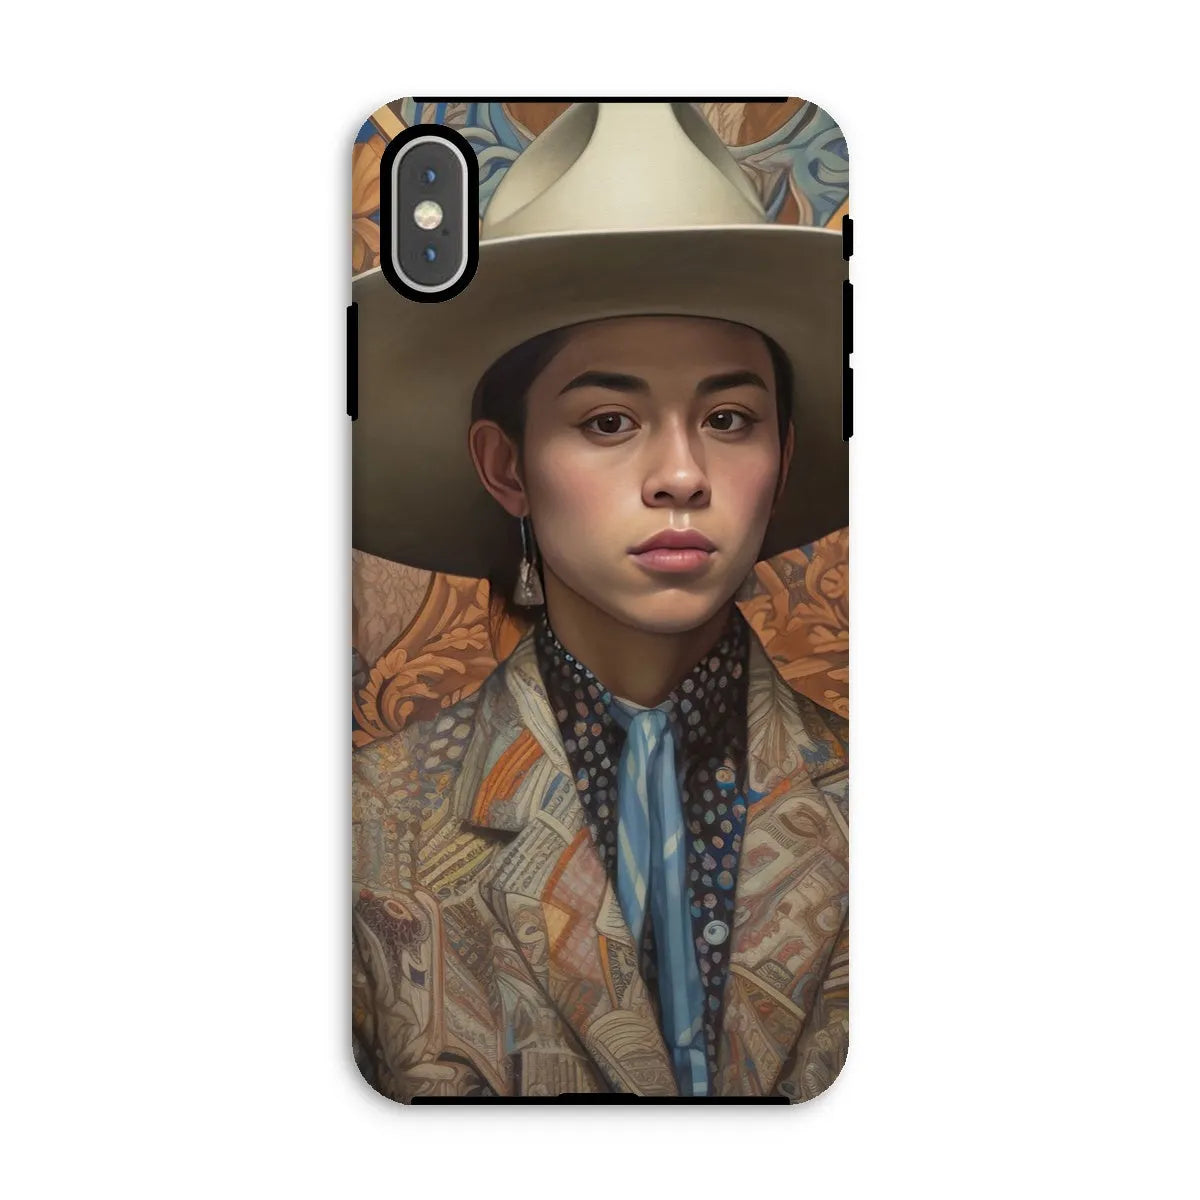 Angel The Transgender Cowboy - F2m Outlaw Art Phone Case - Iphone Xs Max / Matte - Mobile Phone Cases - Aesthetic Art